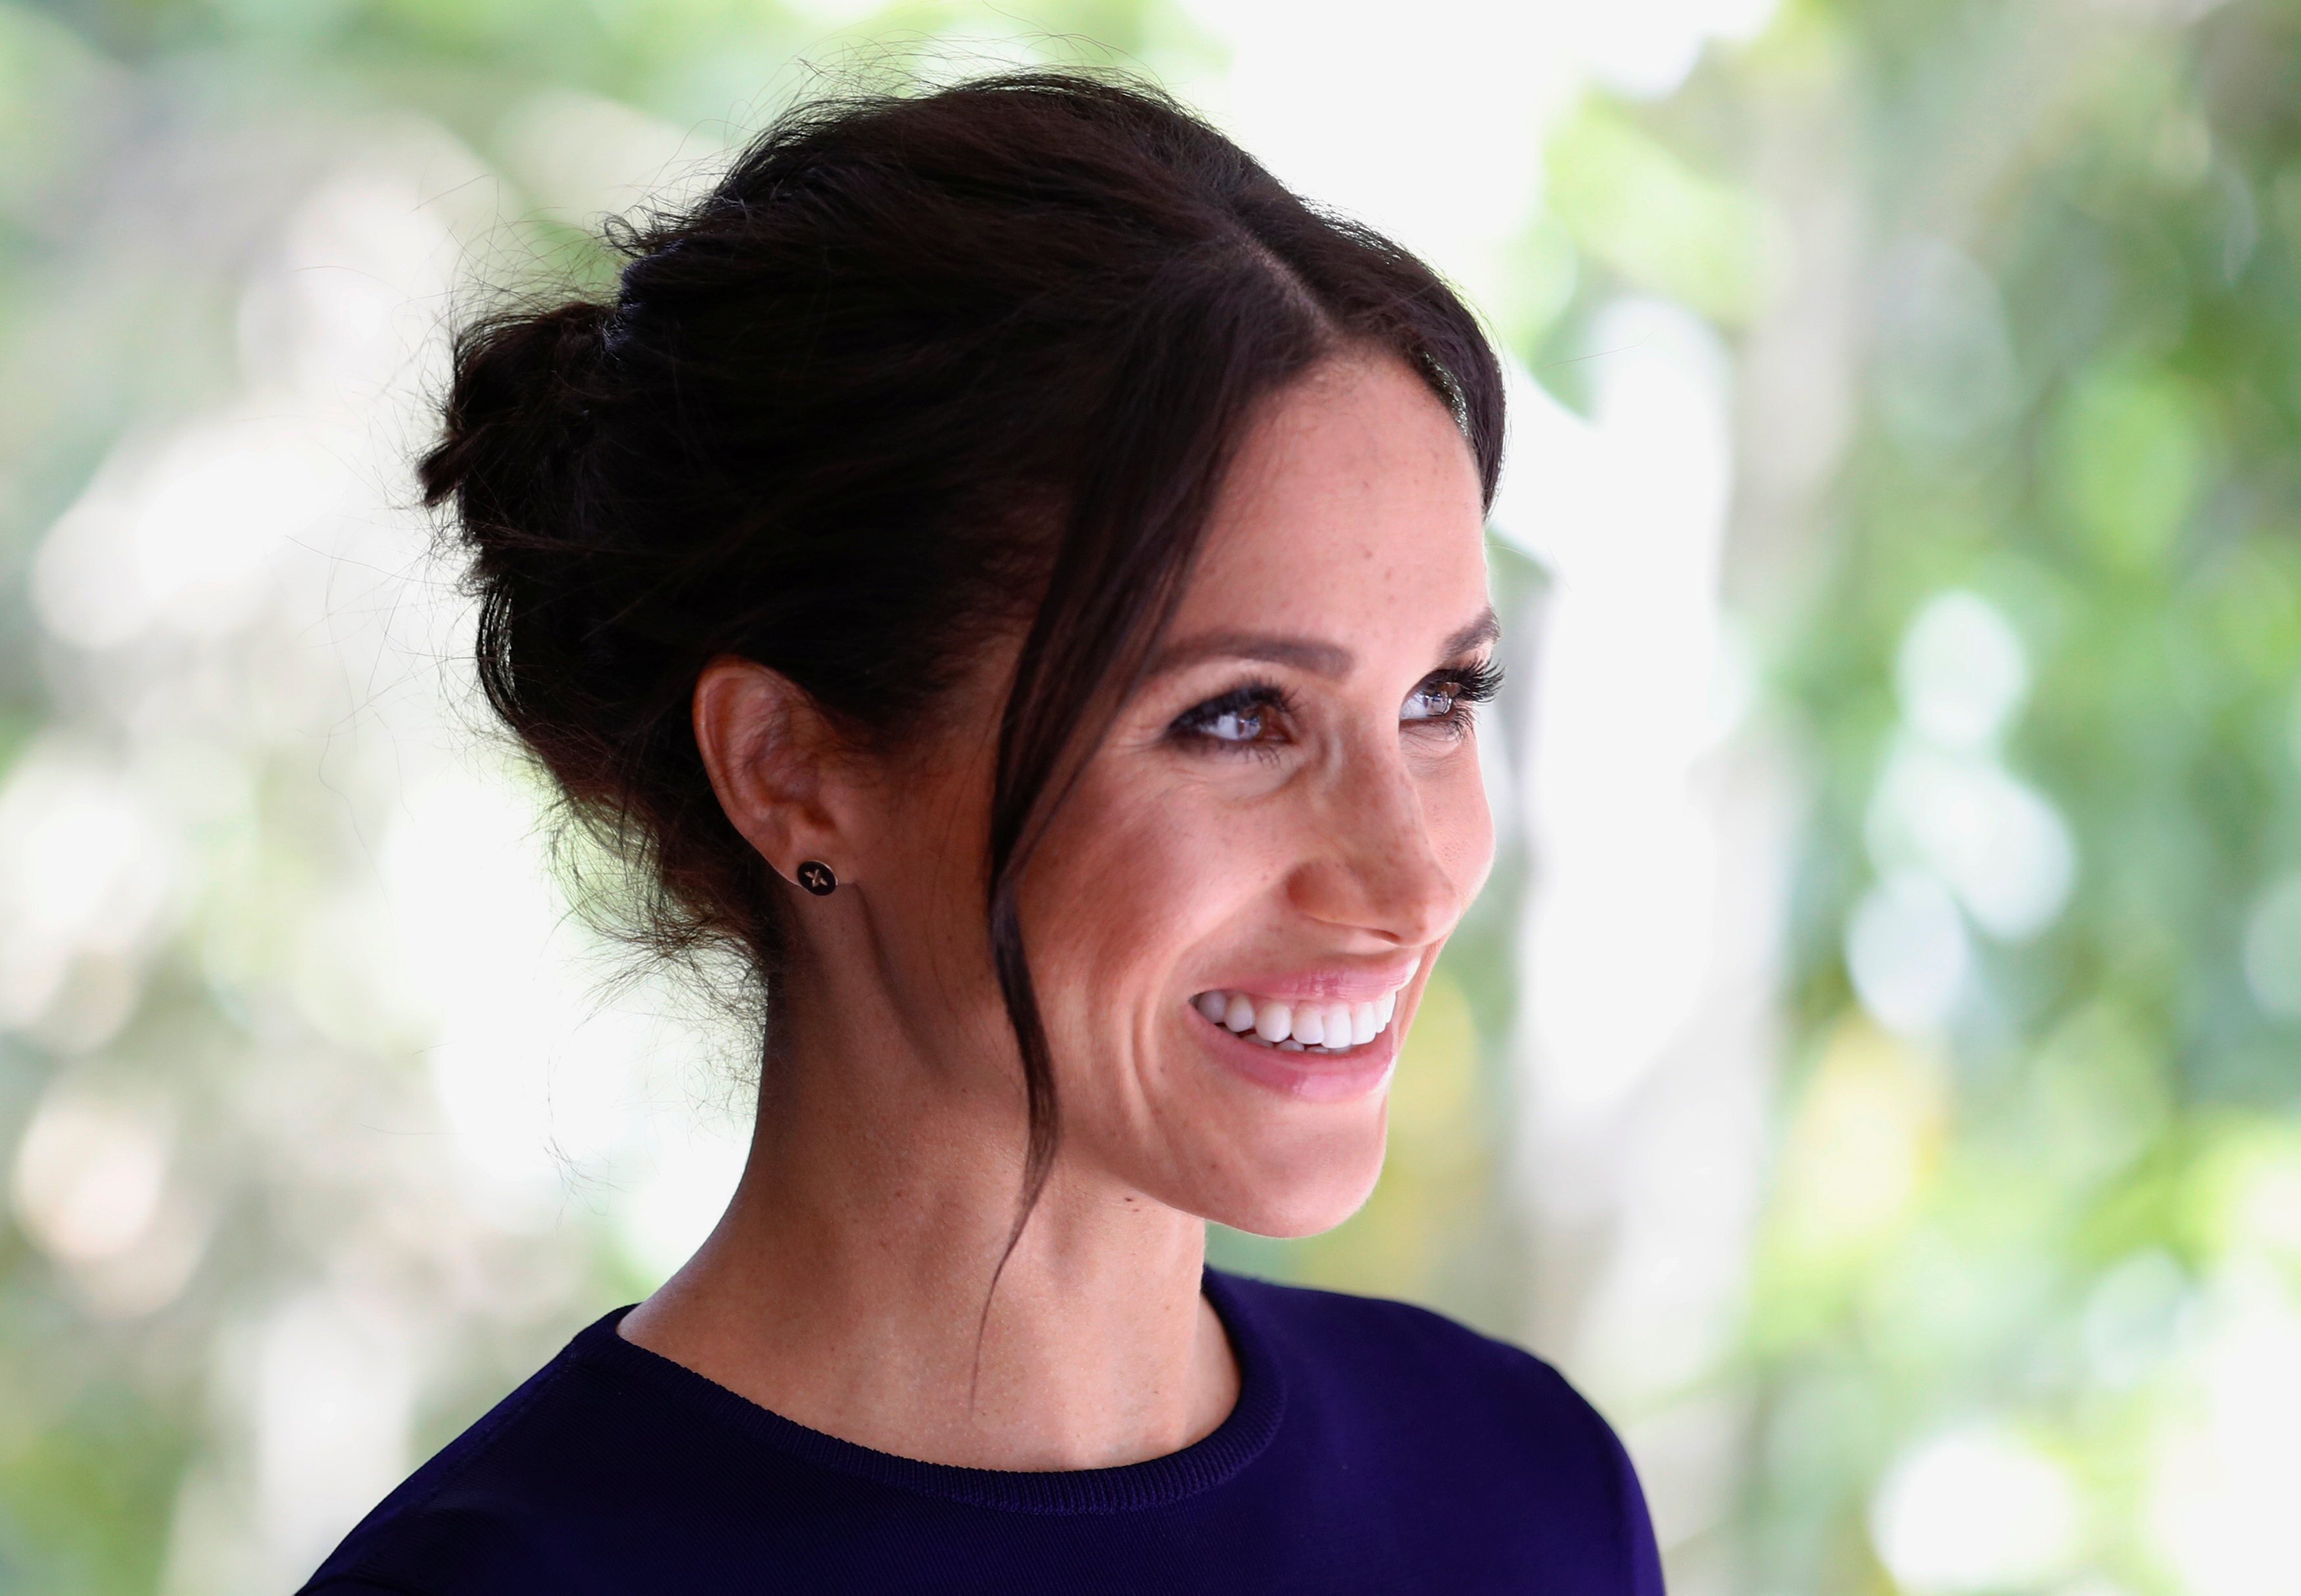 Meghan, Duchess of Sussex visit the National Kiwi Hatchery at Rainbow Springs on October 31, 2018 in Rotorua, New Zealand. | Photo: GettyImages